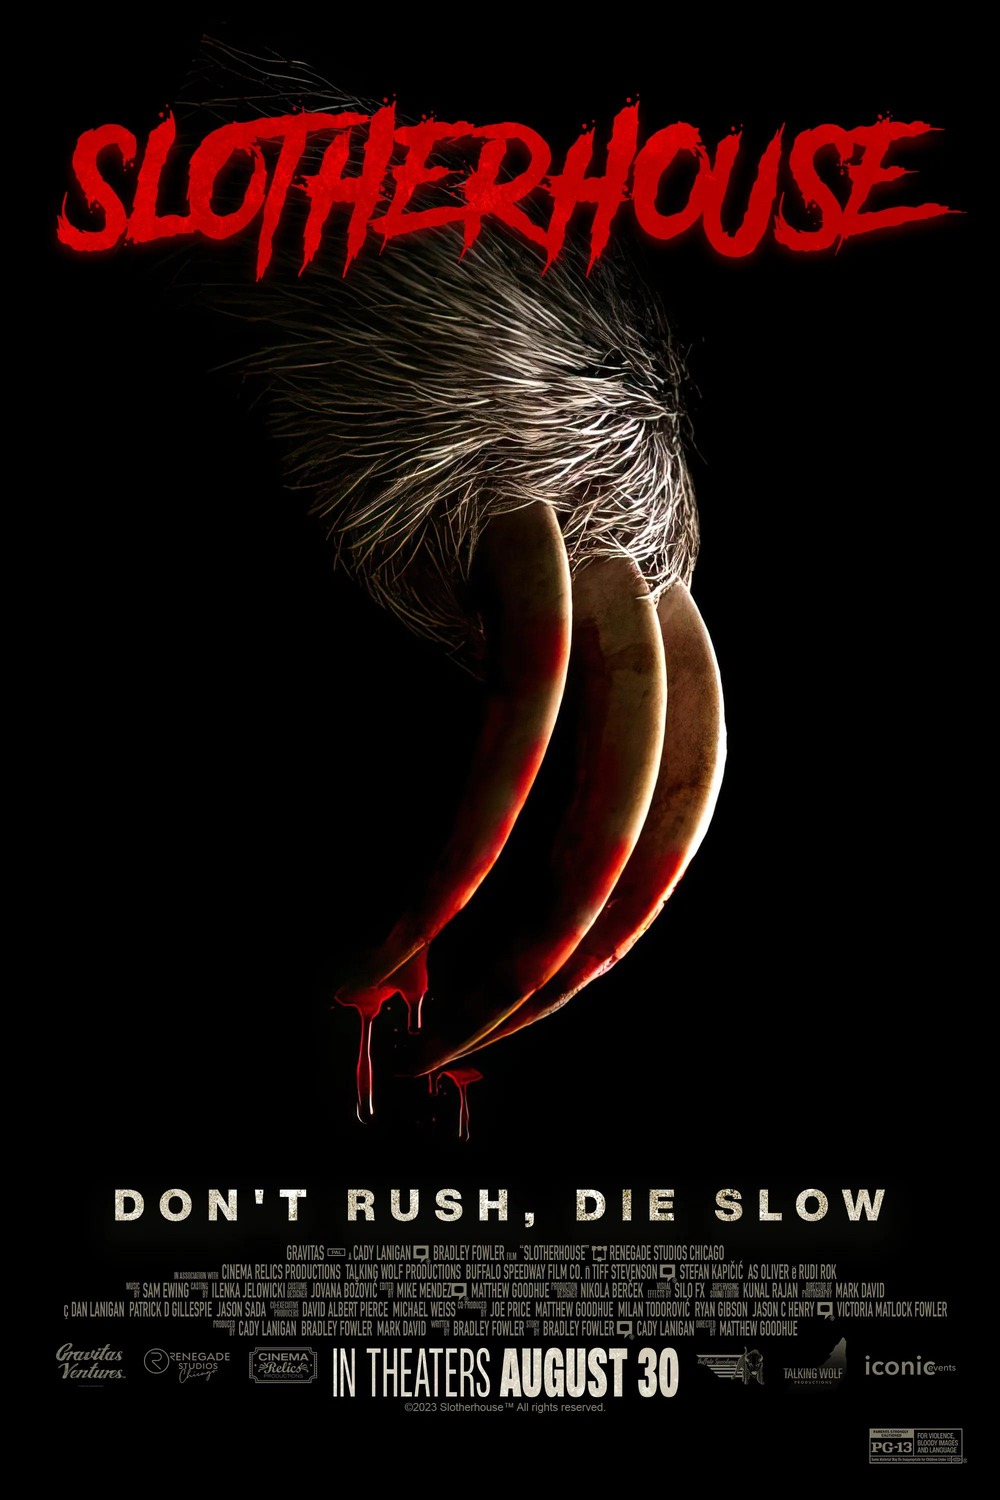 Slotherhouse – The Killer Sloth movie gets a poster | Live for Films